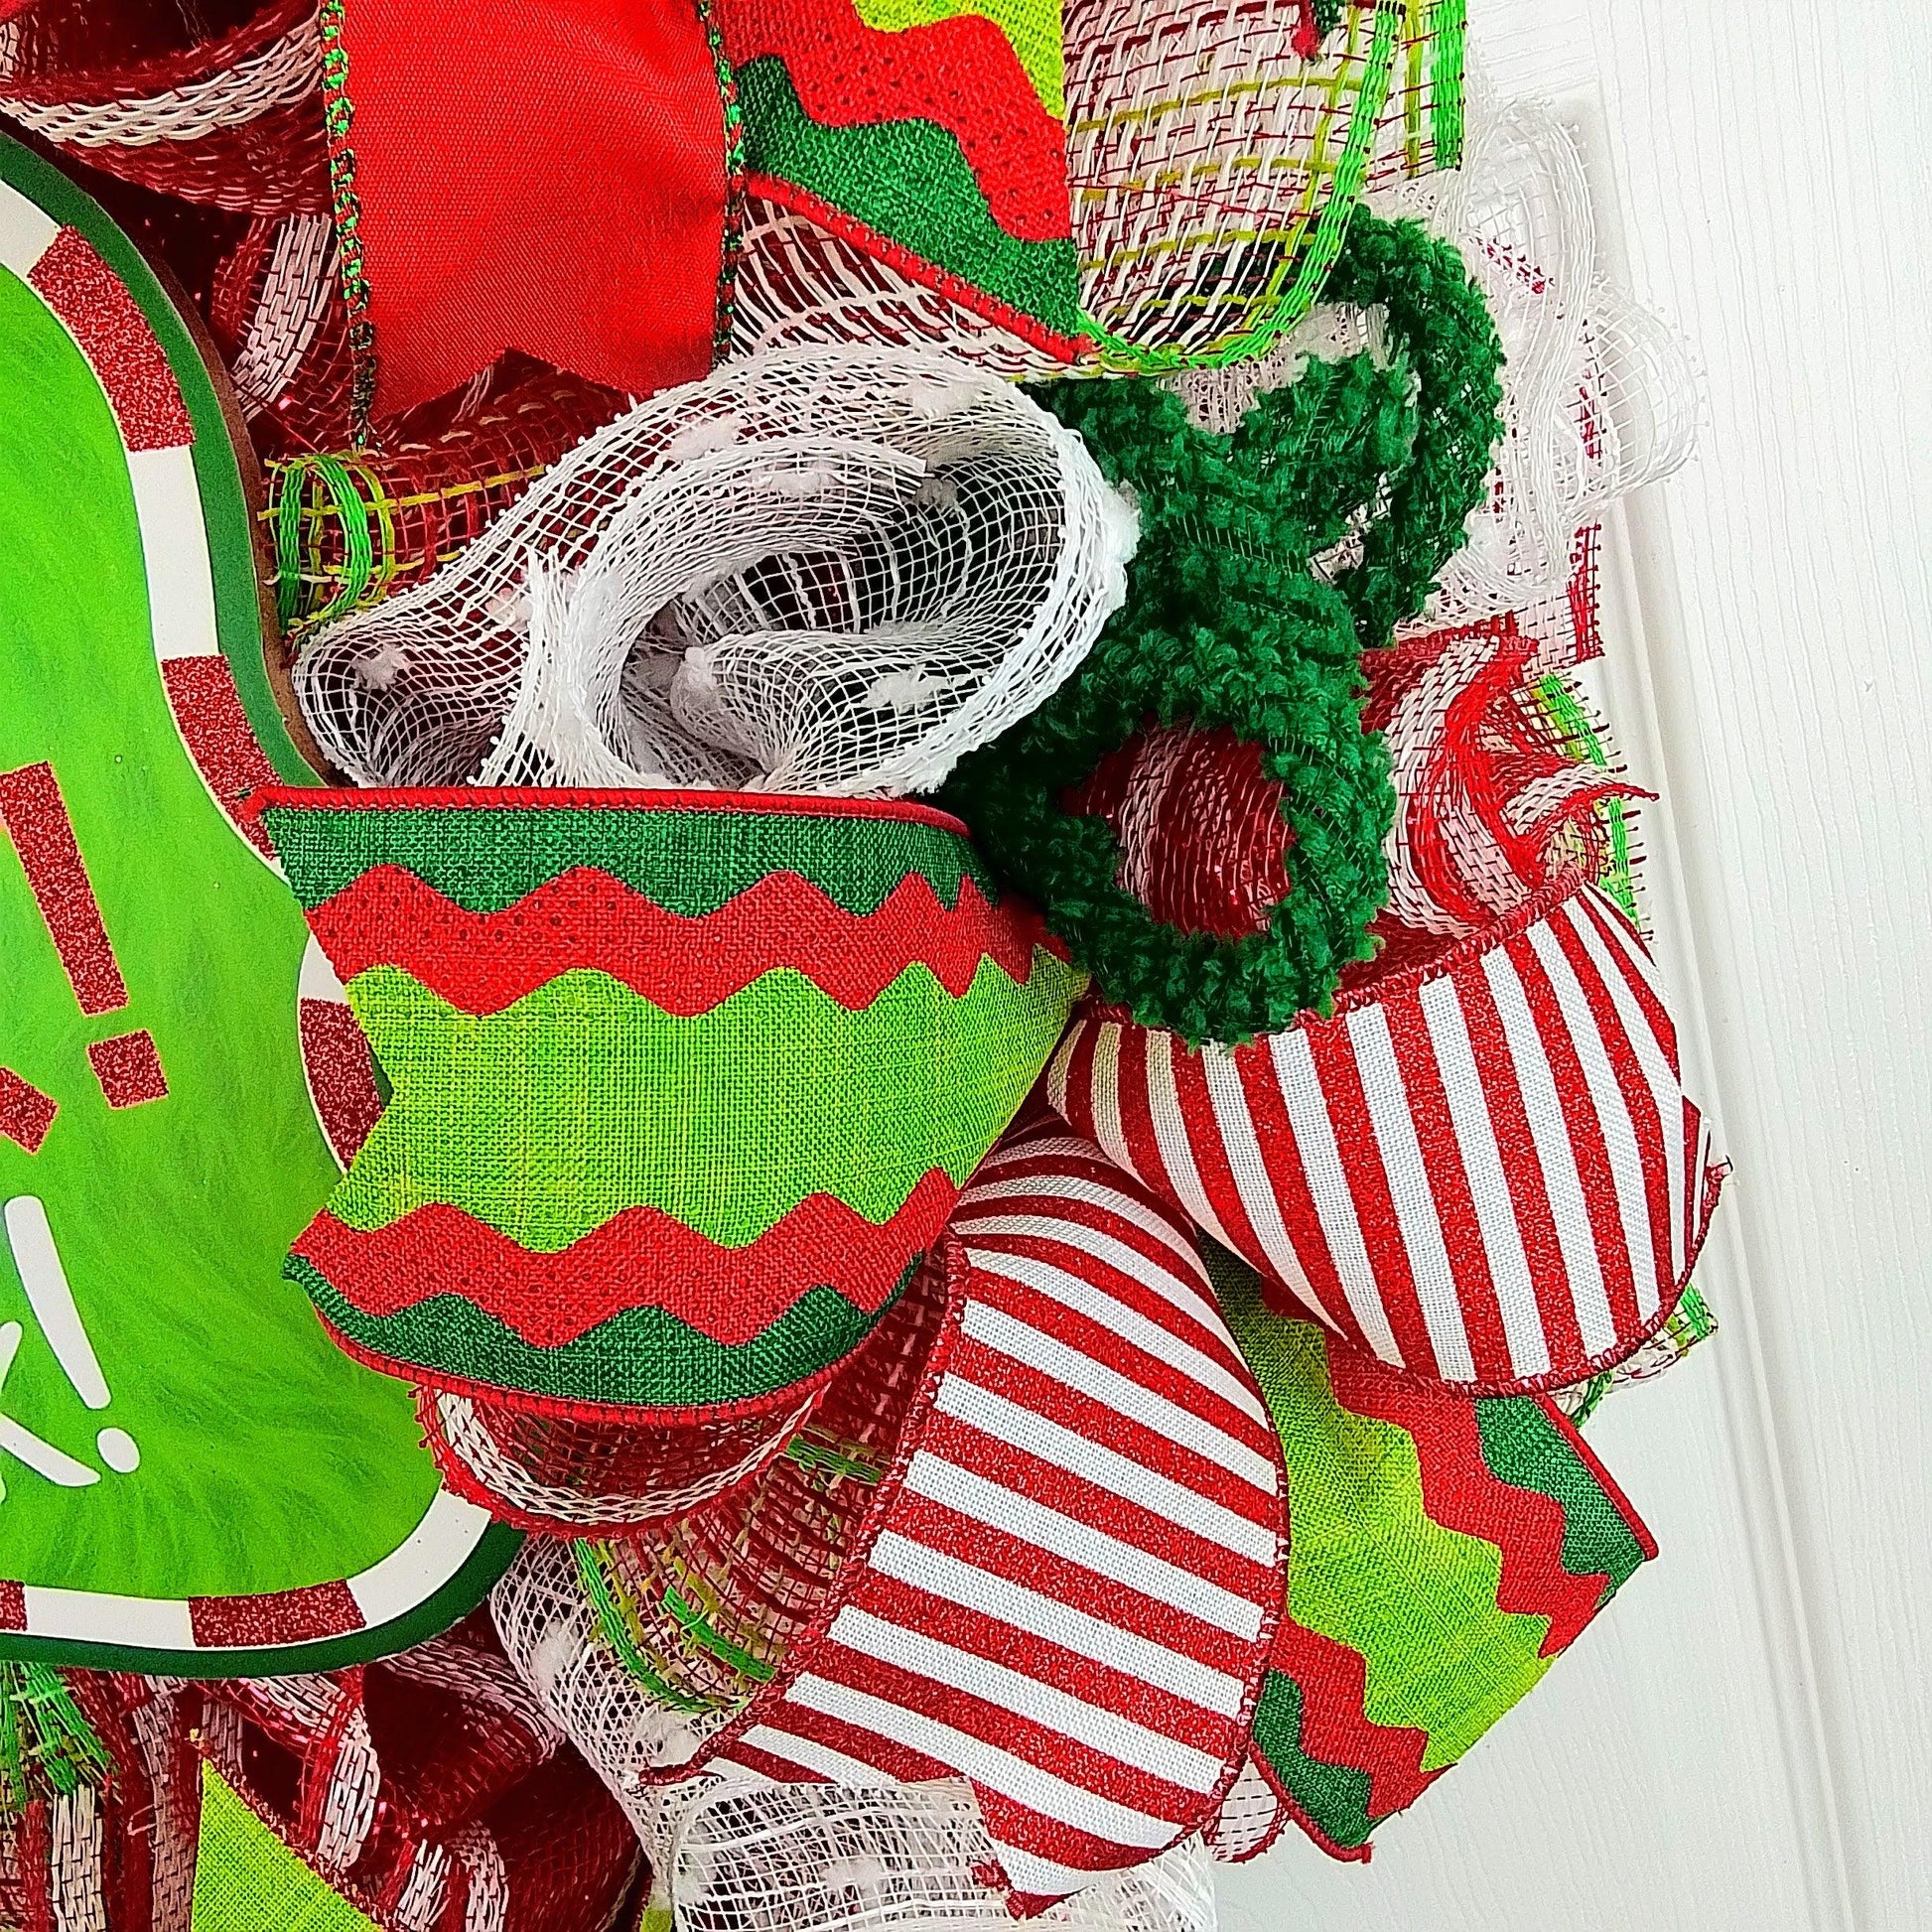 Stink Stank Stunk Christmas Wreath - Xmas Mesh Door Decor - Holiday Decorations - Red White Emerald Lime Green - Pink Door Wreaths